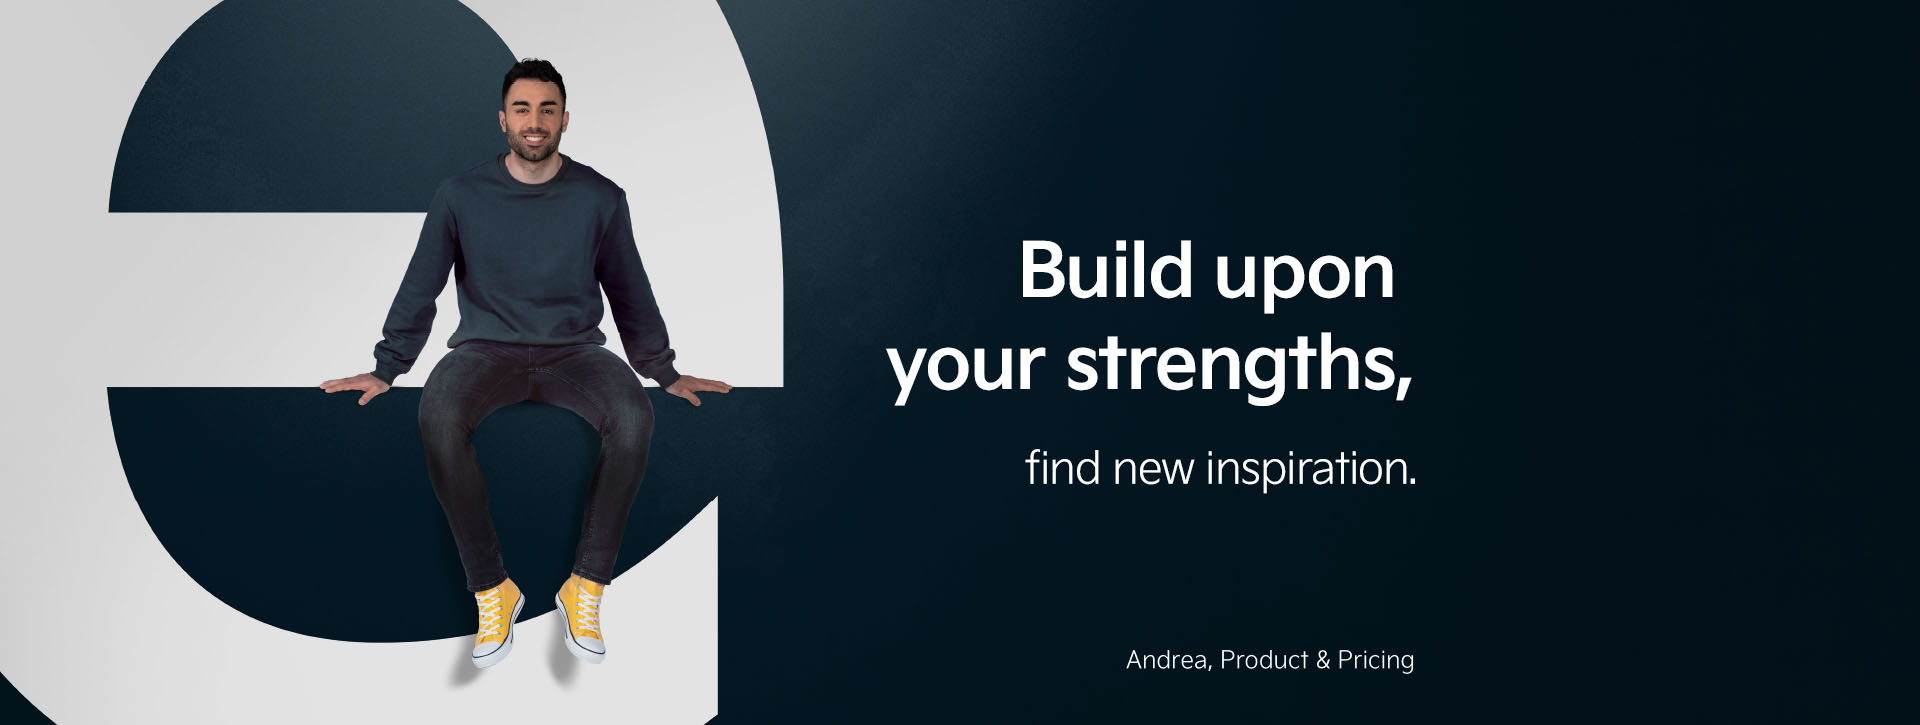 Andrea from our Product and Pricing department is sitting on the letter "e". Next to him we find the statement "Build upon your strenghts - find new inspiration".